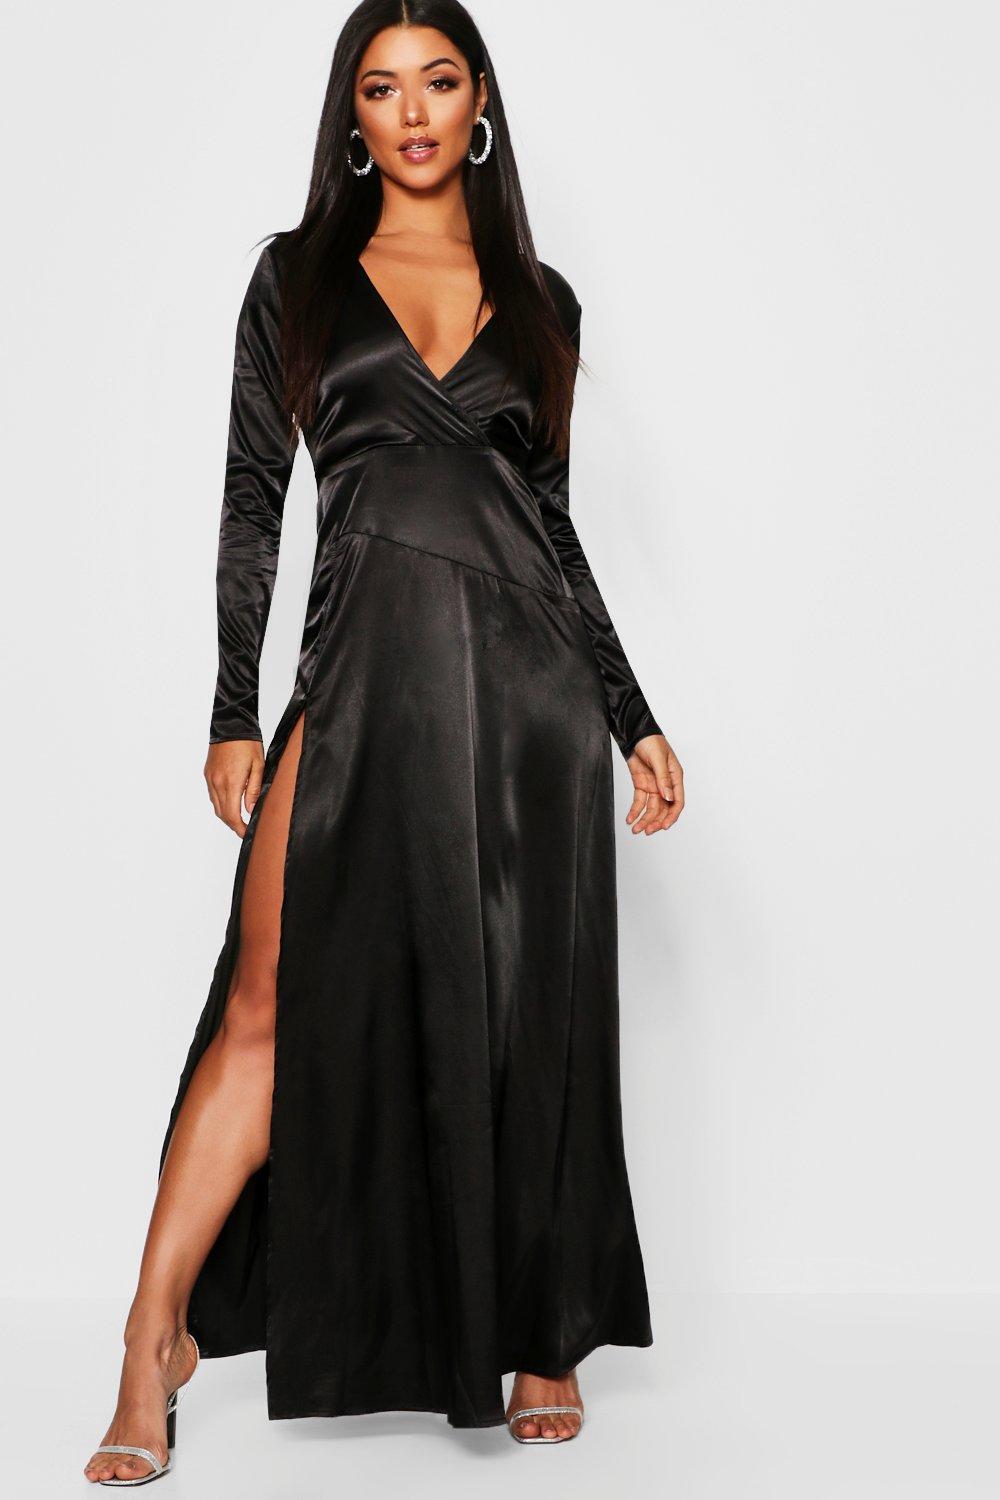 black satin dress with sleeves